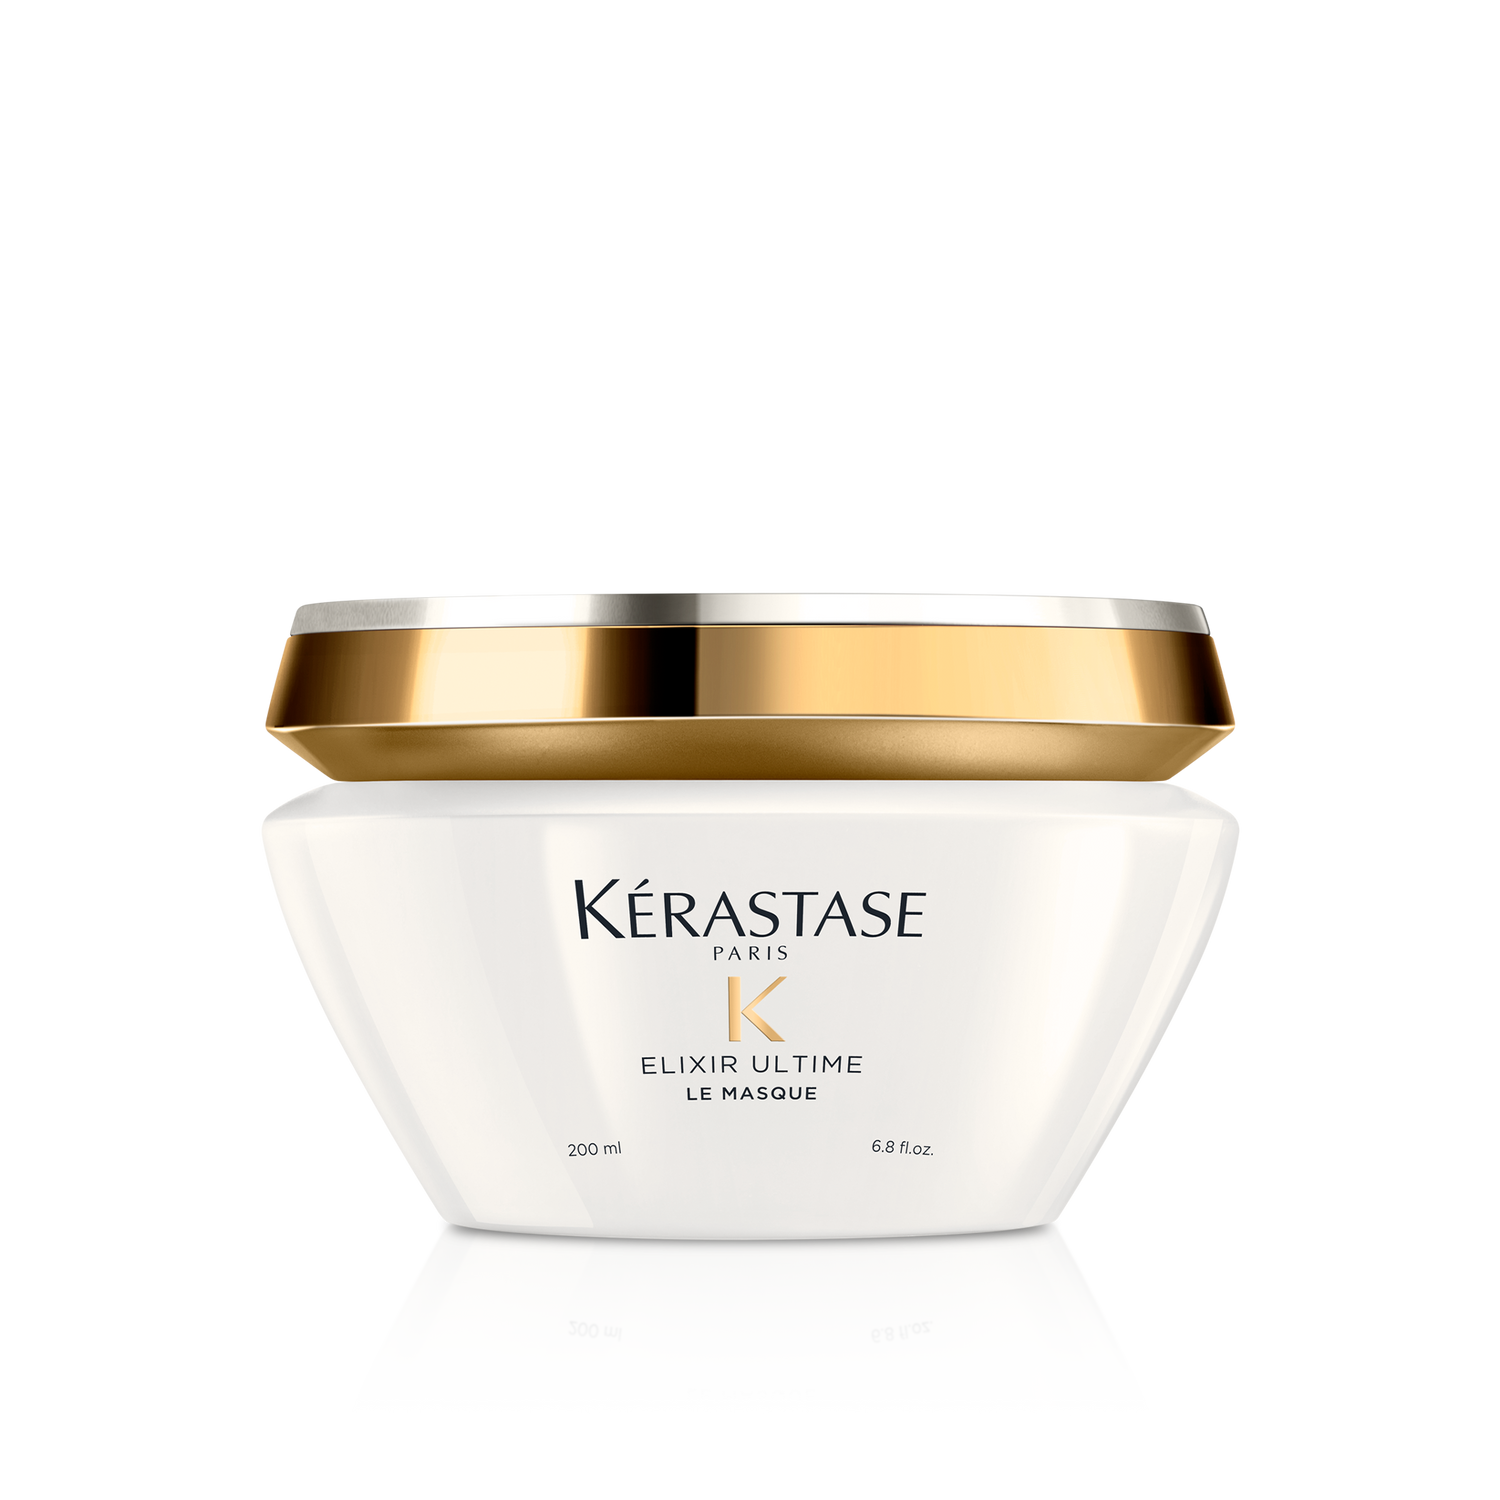 Elixir Ultime Le Mask Sublimating Oil Infused Masque